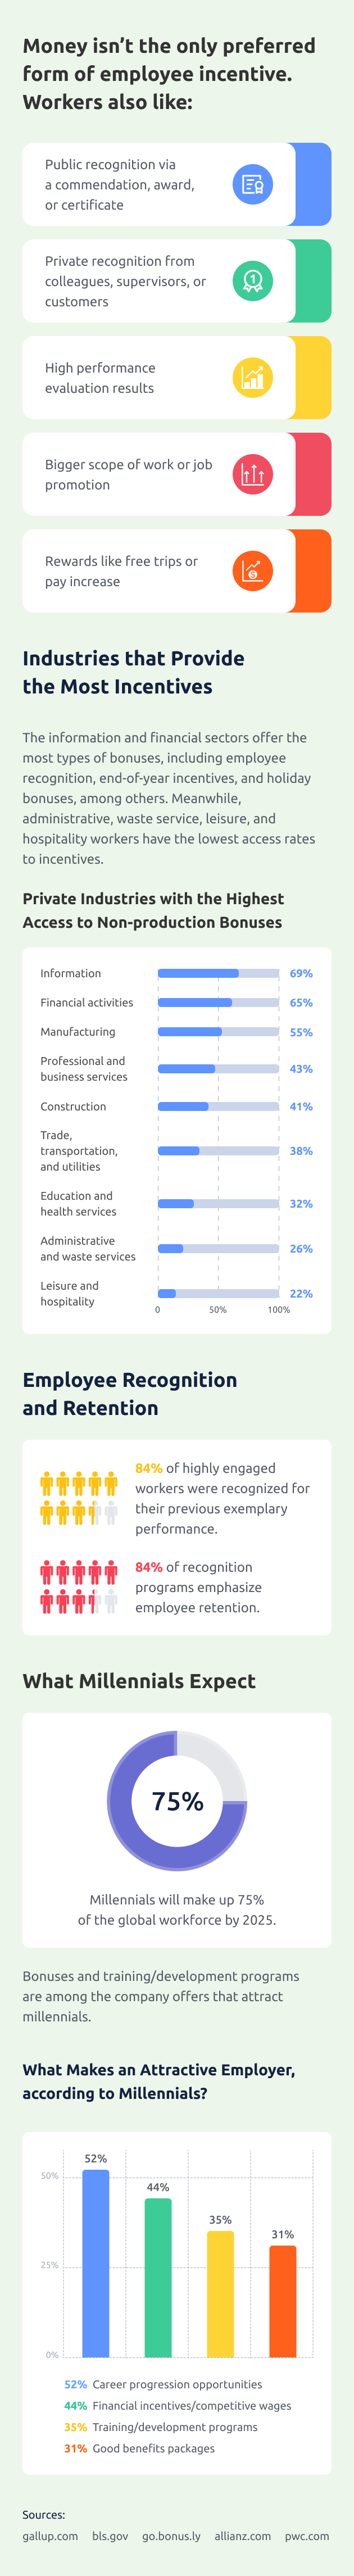 INFOGRAPHIC-employee-incentives-facts